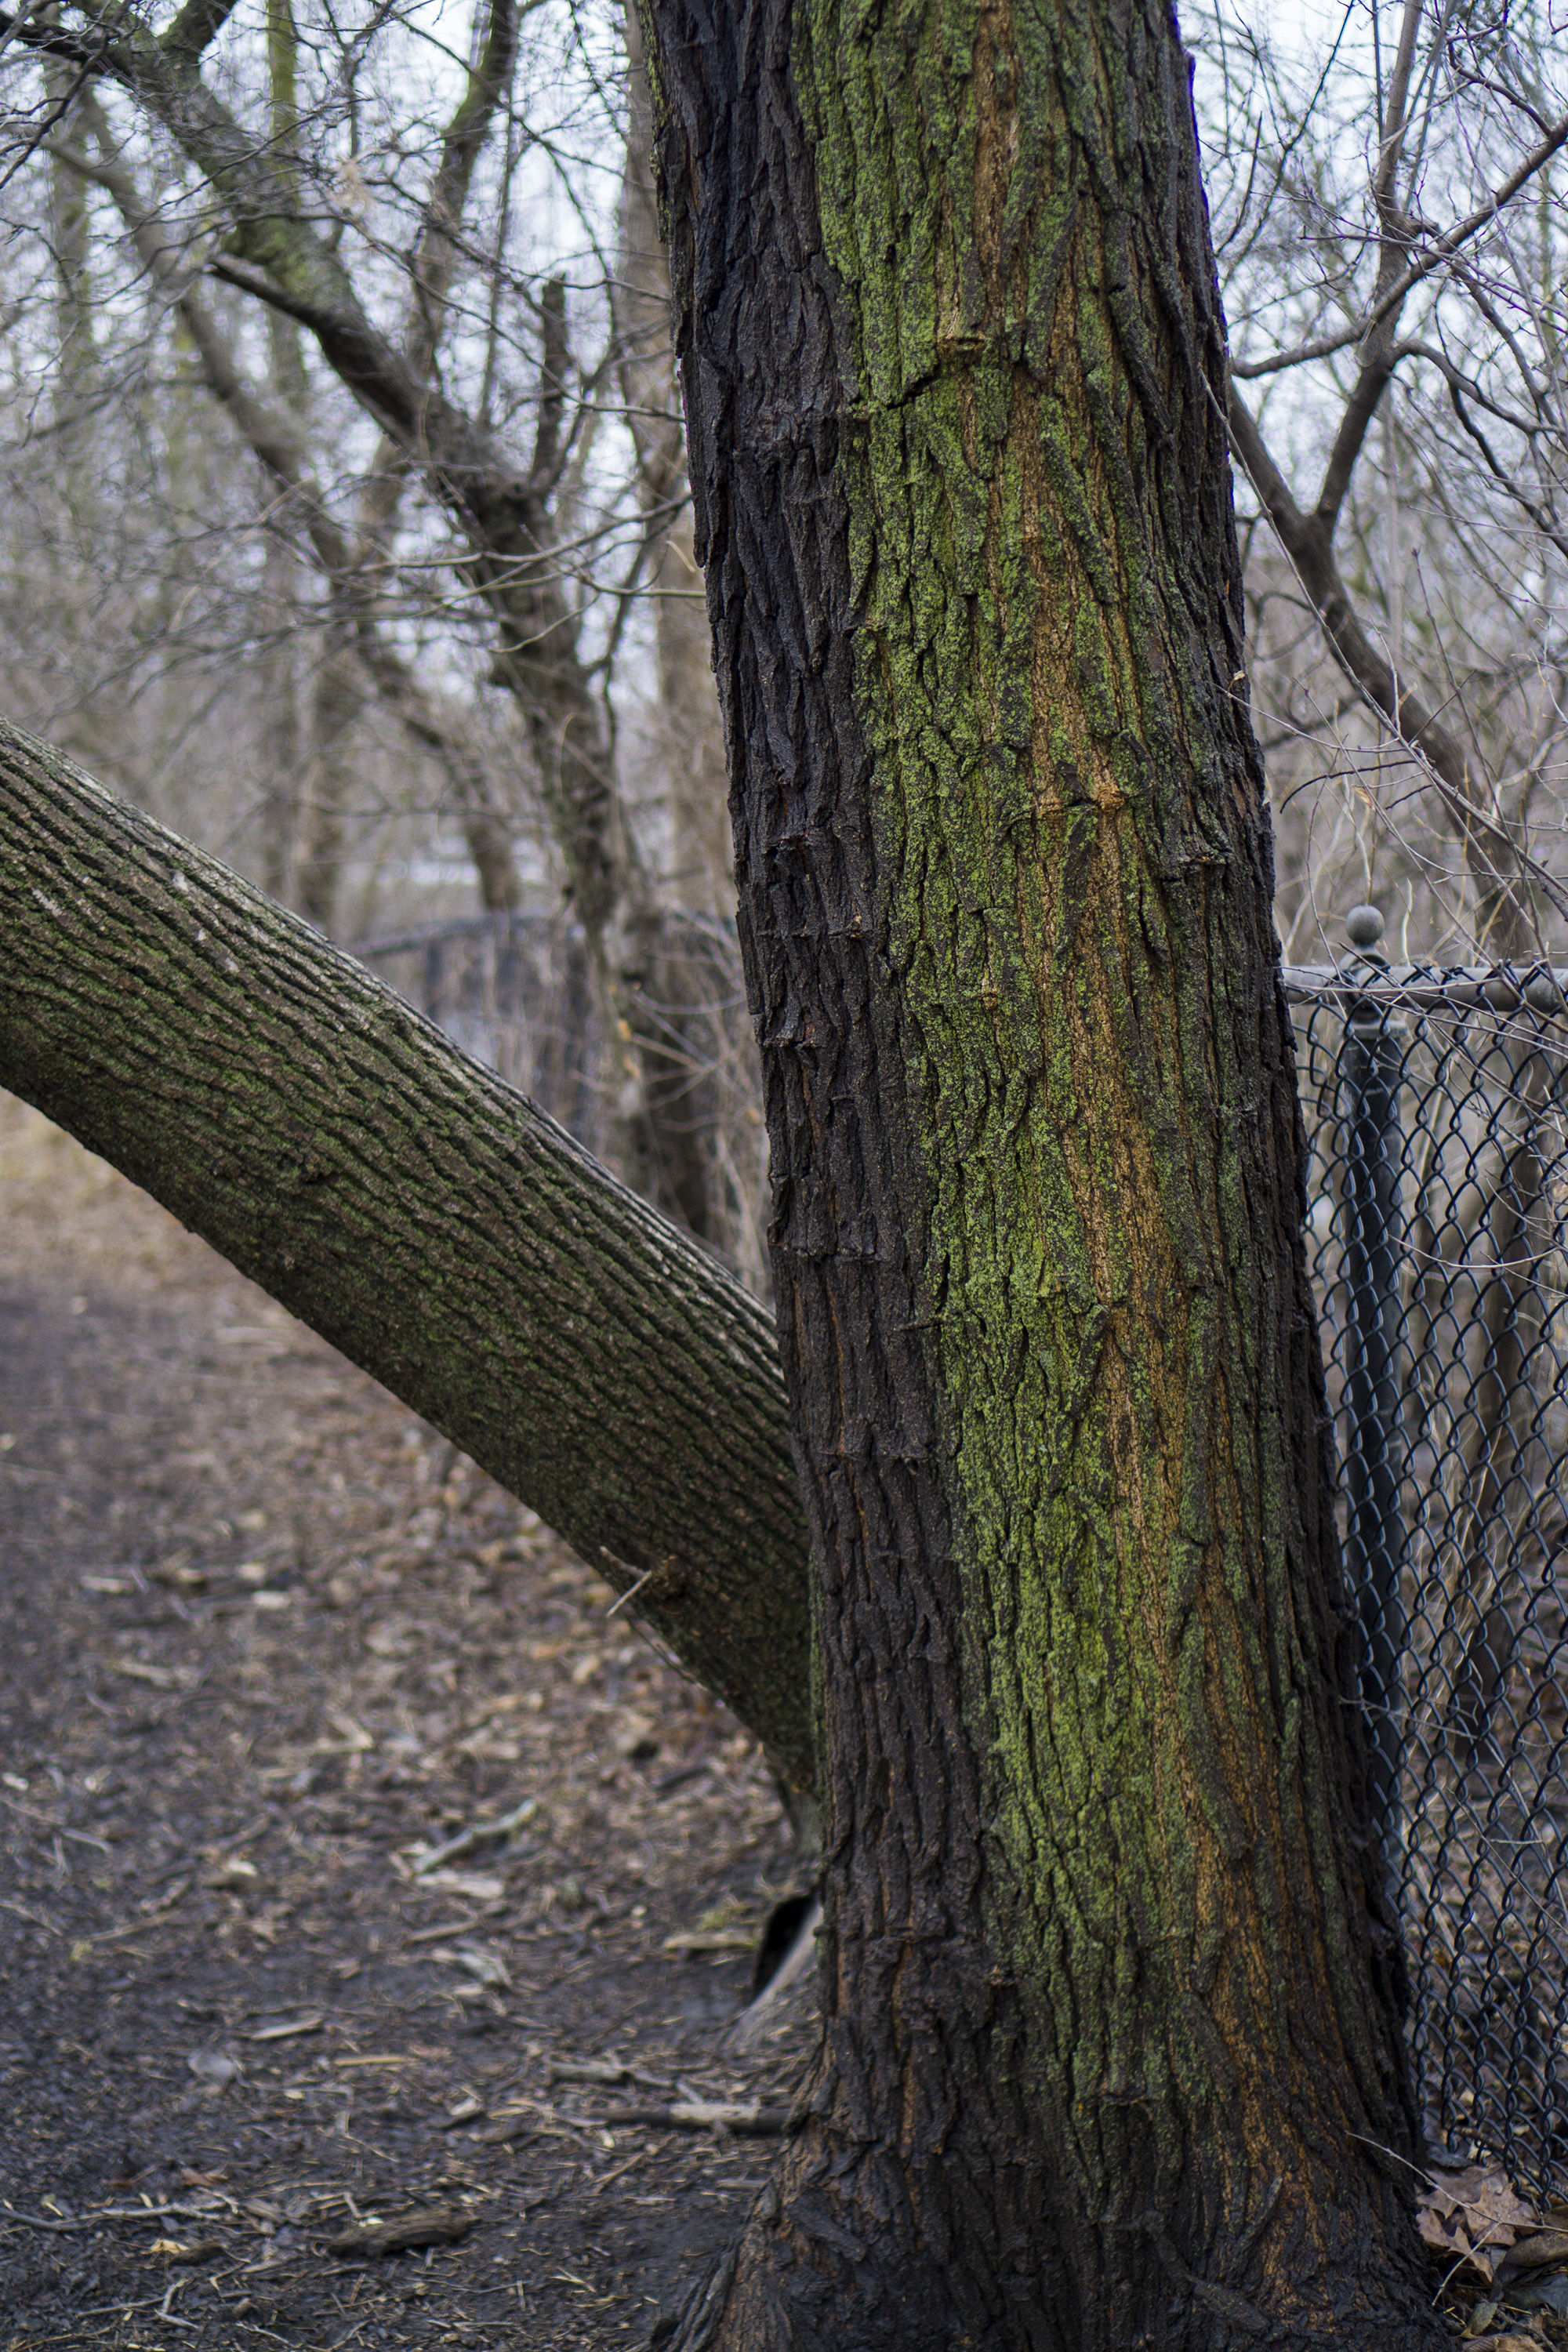 Mossy tree trunks against a fence in Gompers Park, Chicago IL / Darker than Green